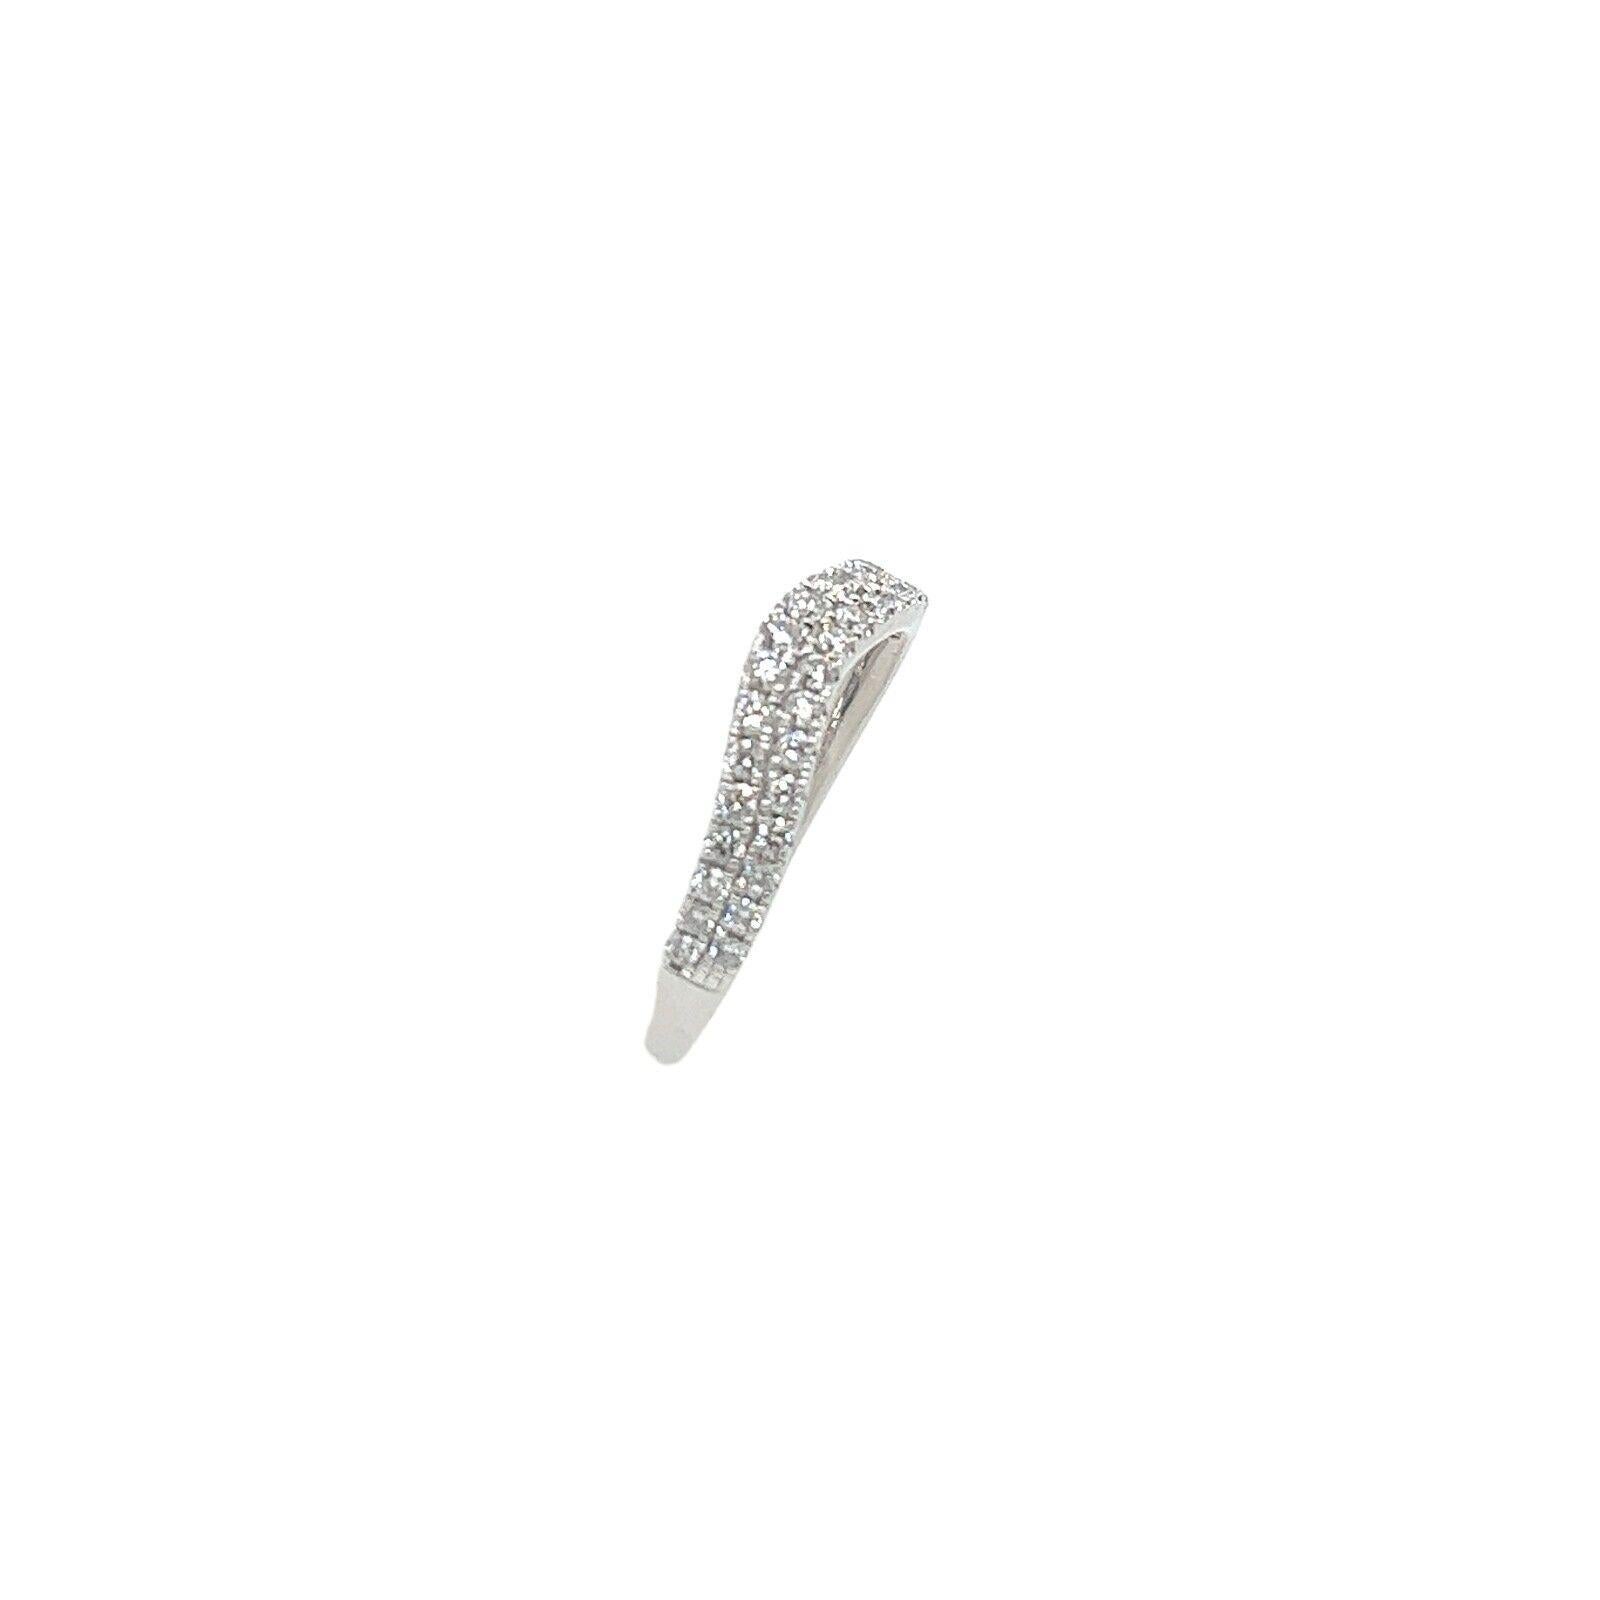 This Diamond half eternity band is set with 0.34ct round brilliant cut Diamonds. This ring is elegant and beautiful for a wedding or anniversary ring, set in 9ct White Gold.

Additional Information: 
Total Diamond Weight: 0.34ct 
Diamond Colour: